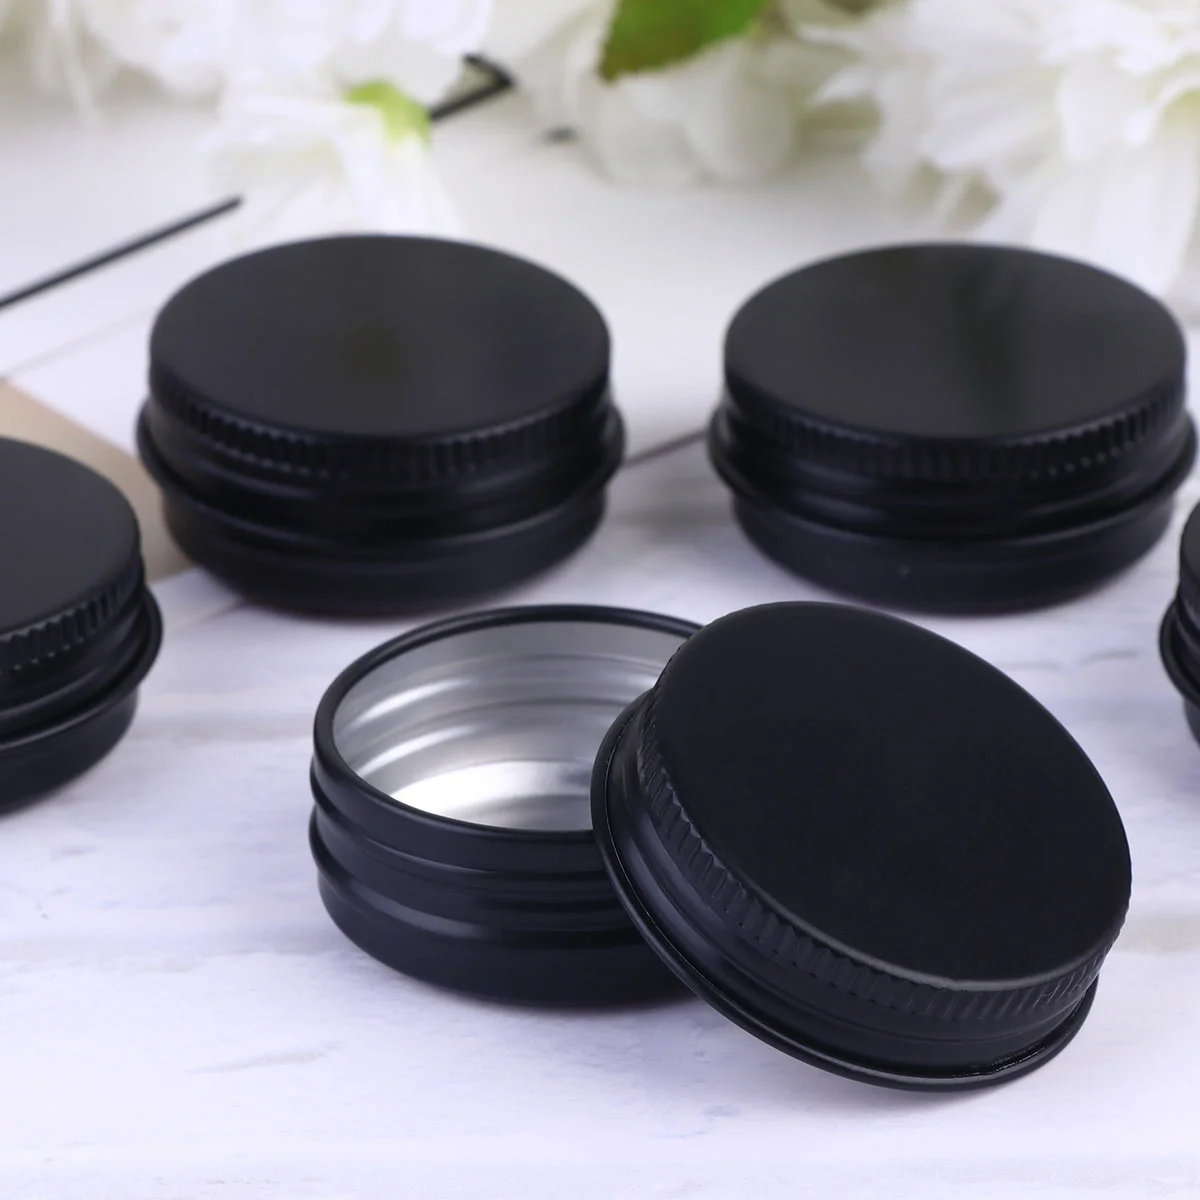 20Pcs 15ml Aluminium Boxes Powder Containers Cream Box for Travel Makeup Samples Small Containers with Lids Cosmetics Container